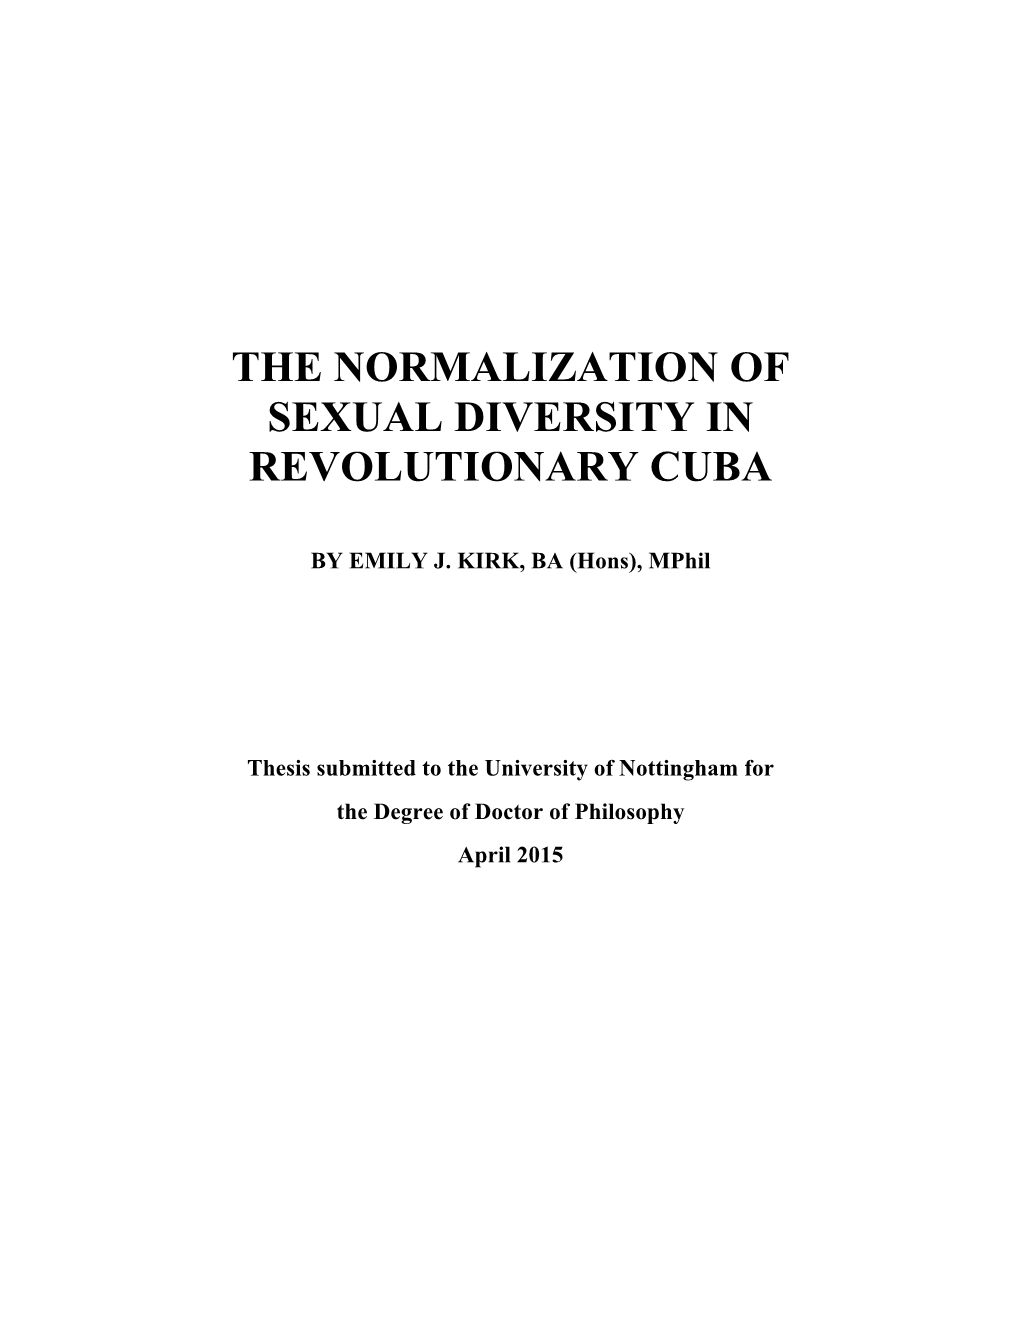 The Normalization of Sexual Diversity in Revolutionary Cuba ! by Emily J